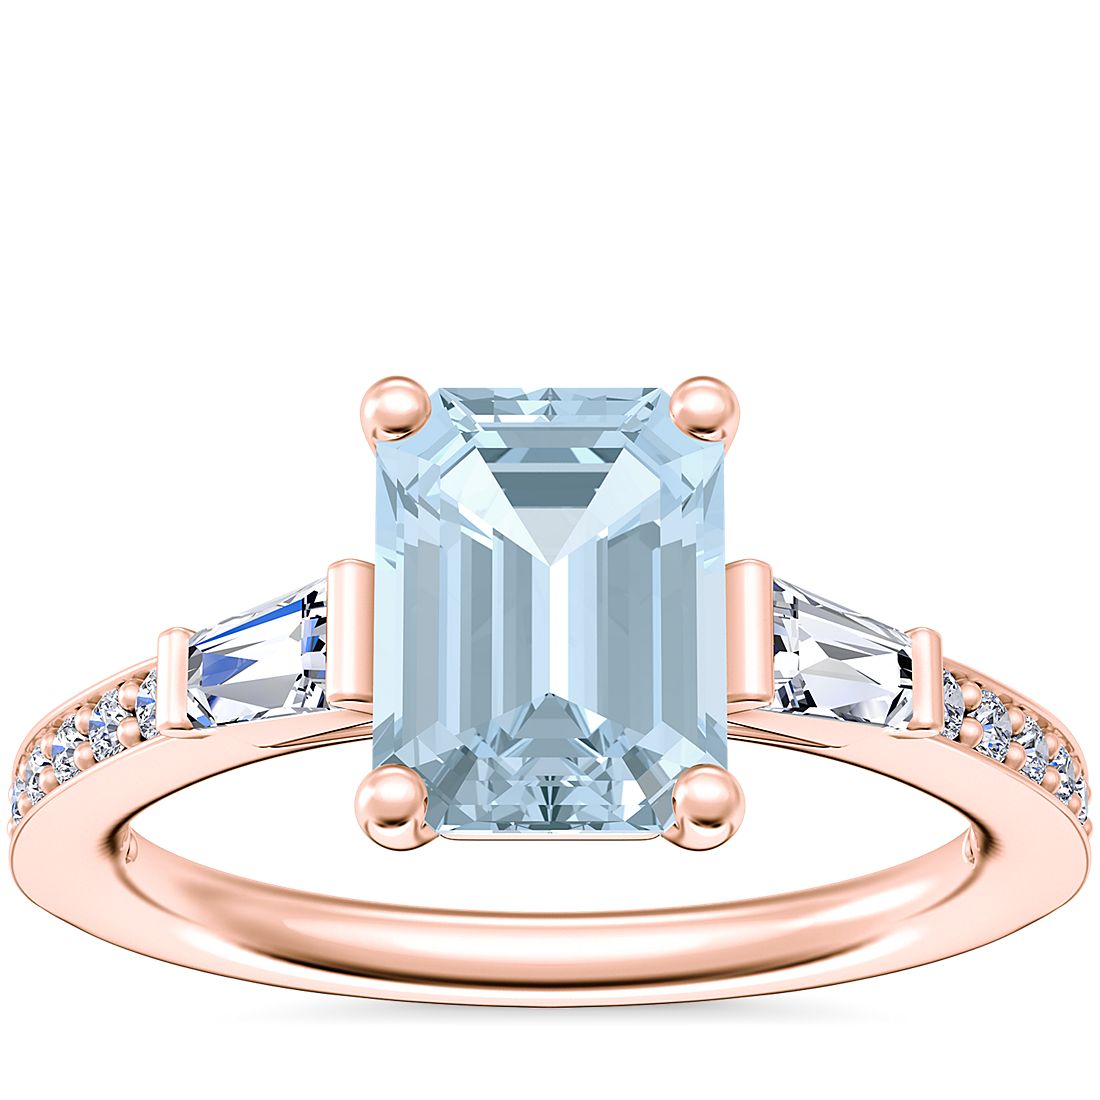 Tapered Baguette Diamond Cathedral Engagement Ring with Emerald-Cut Aquamarine in 14k Rose Gold (8x6mm)